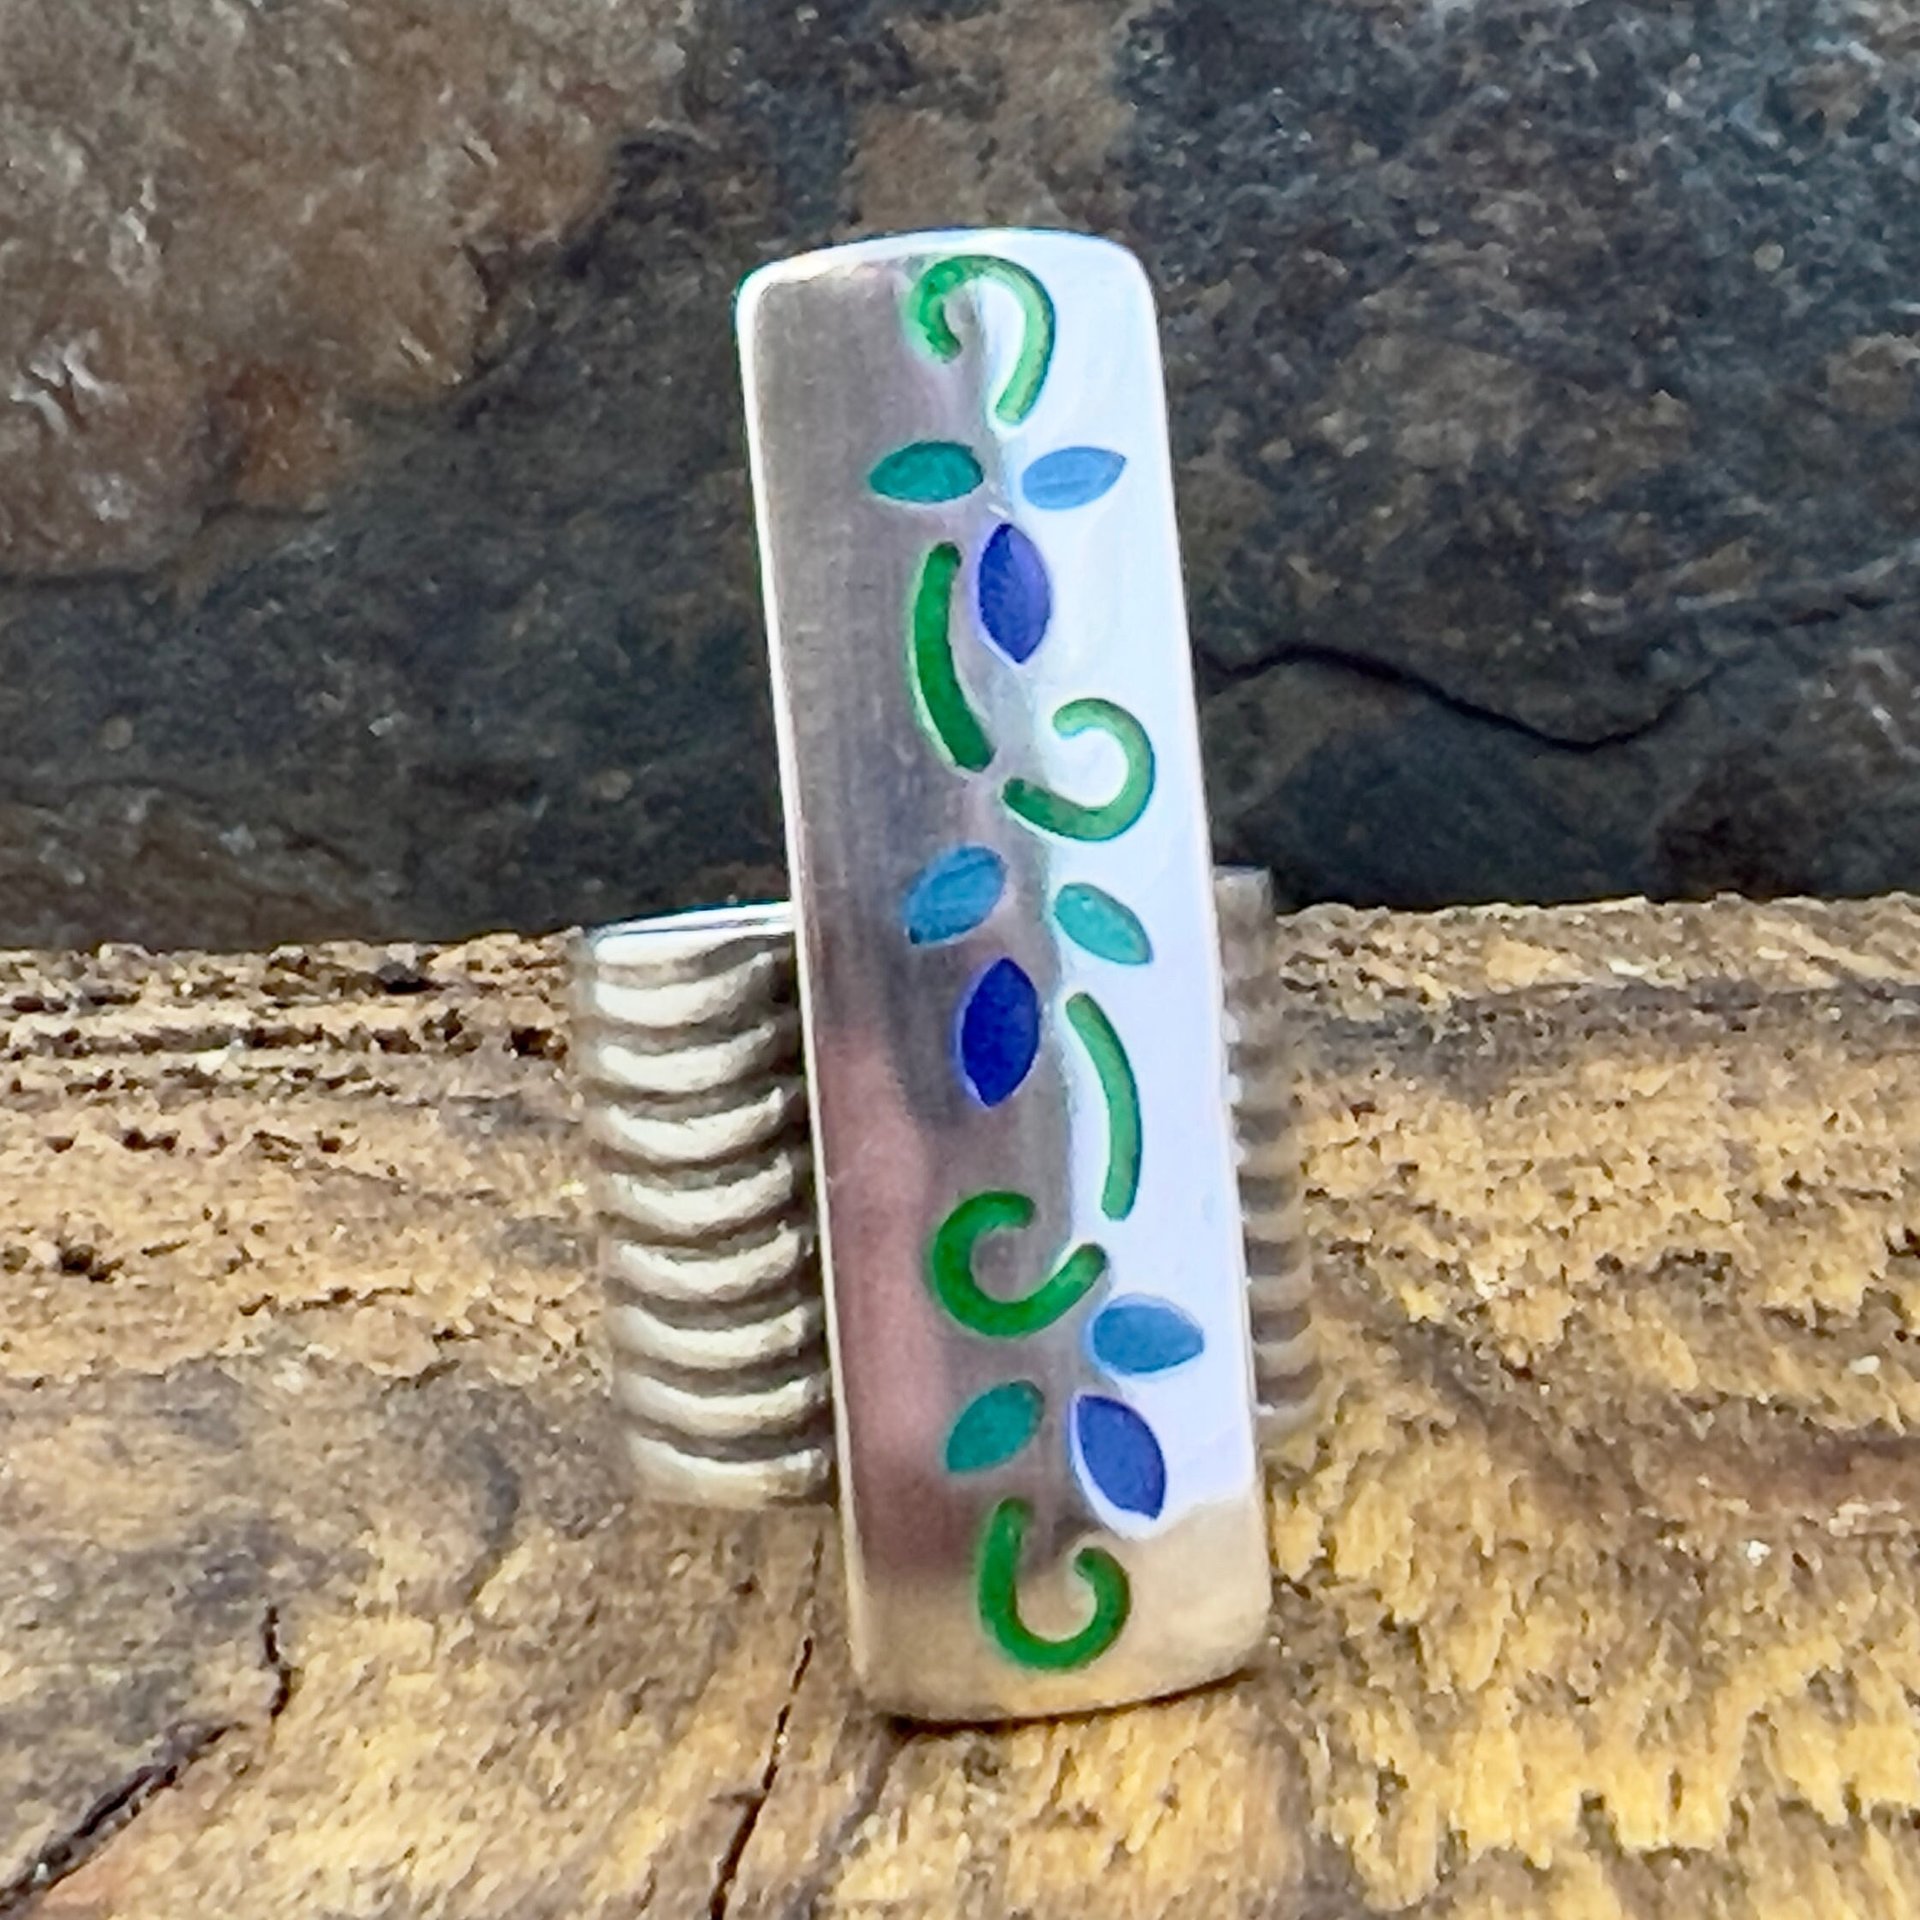 Silver Enamel Ring, Flowering Vine Shield Ring, Fine Silver 999, Statement Ring, Colorful Glass, Wave Wide Band, Hand Crafted Art Jewelry